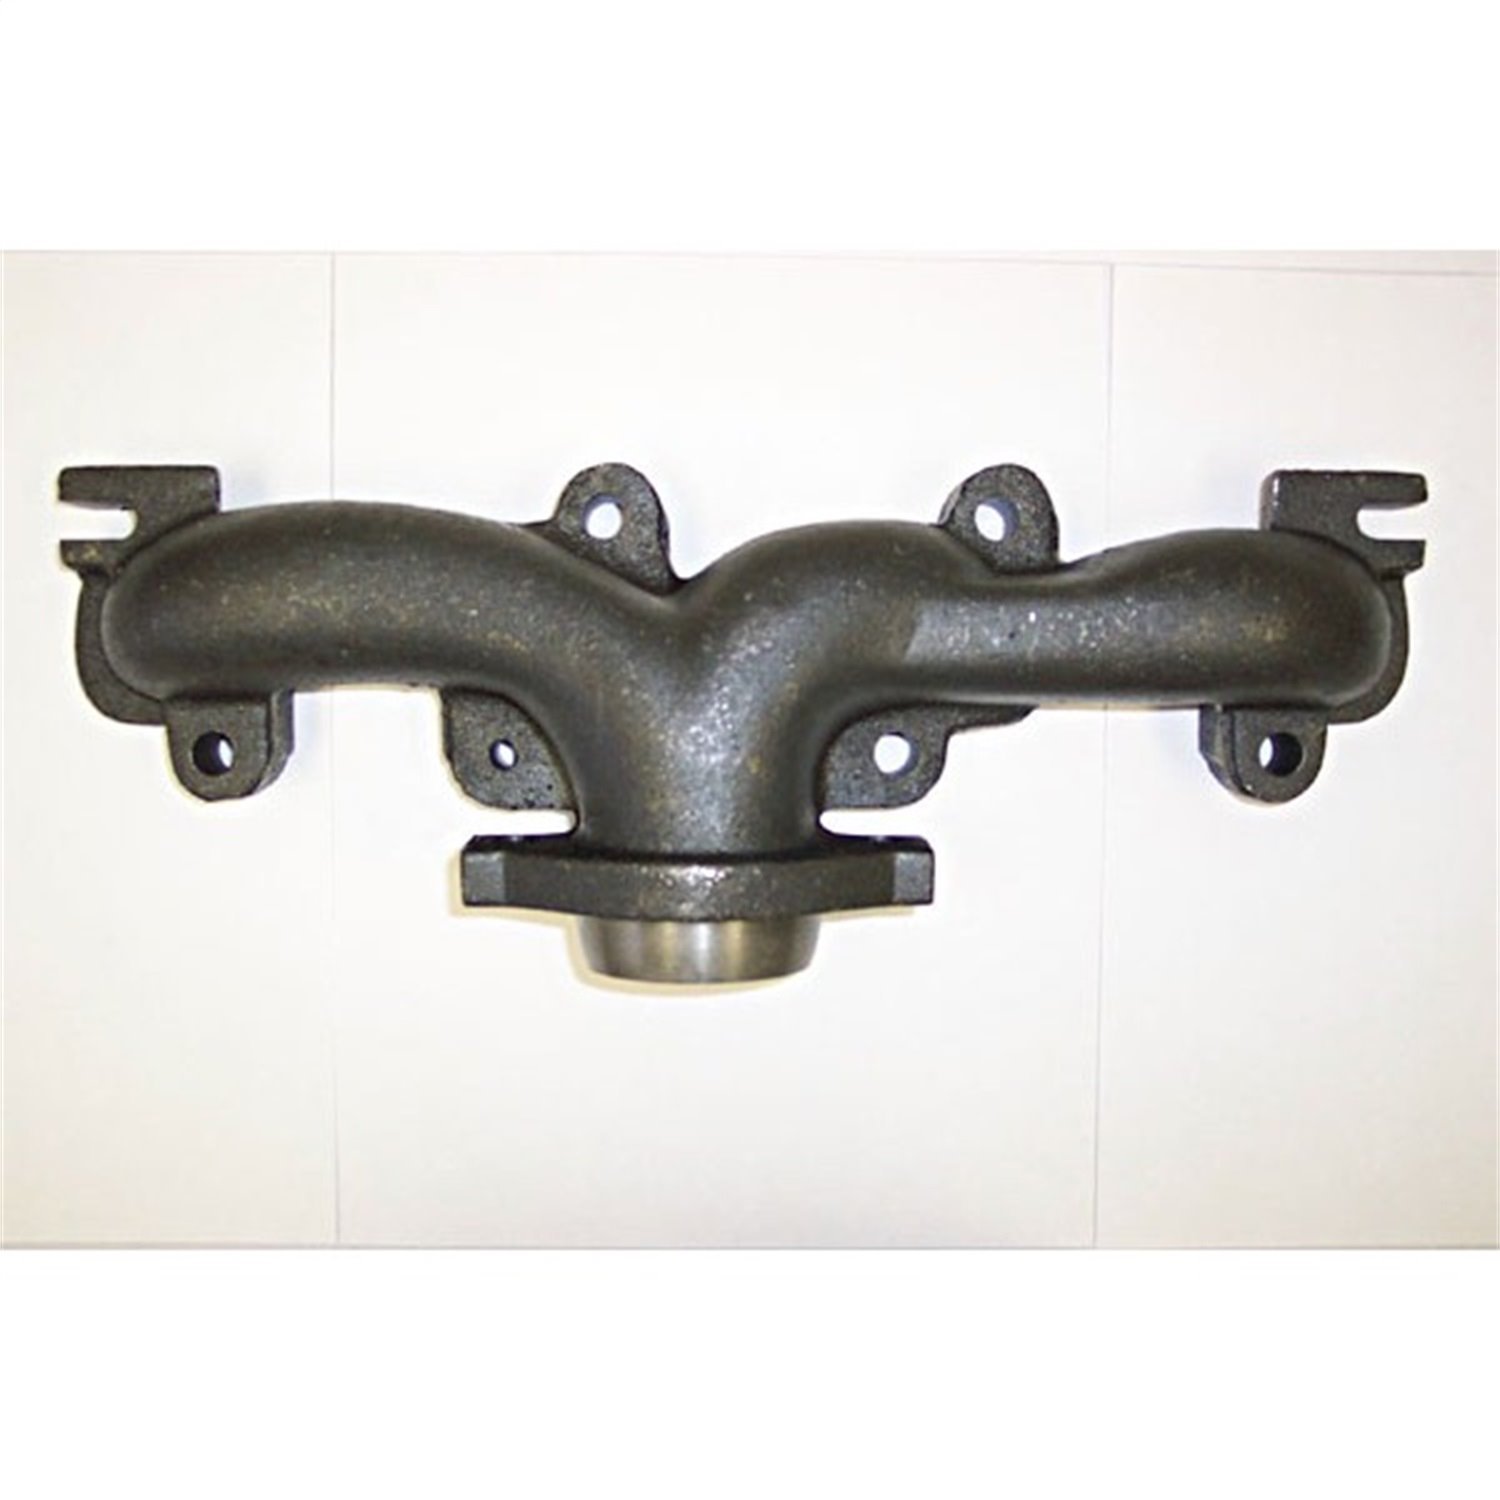 Replacement exhaust manifold from Omix-ADA, Fits 99-04 Jeep Grand Cherokee WJ with a 4.7 liter V8 engine. Right side.